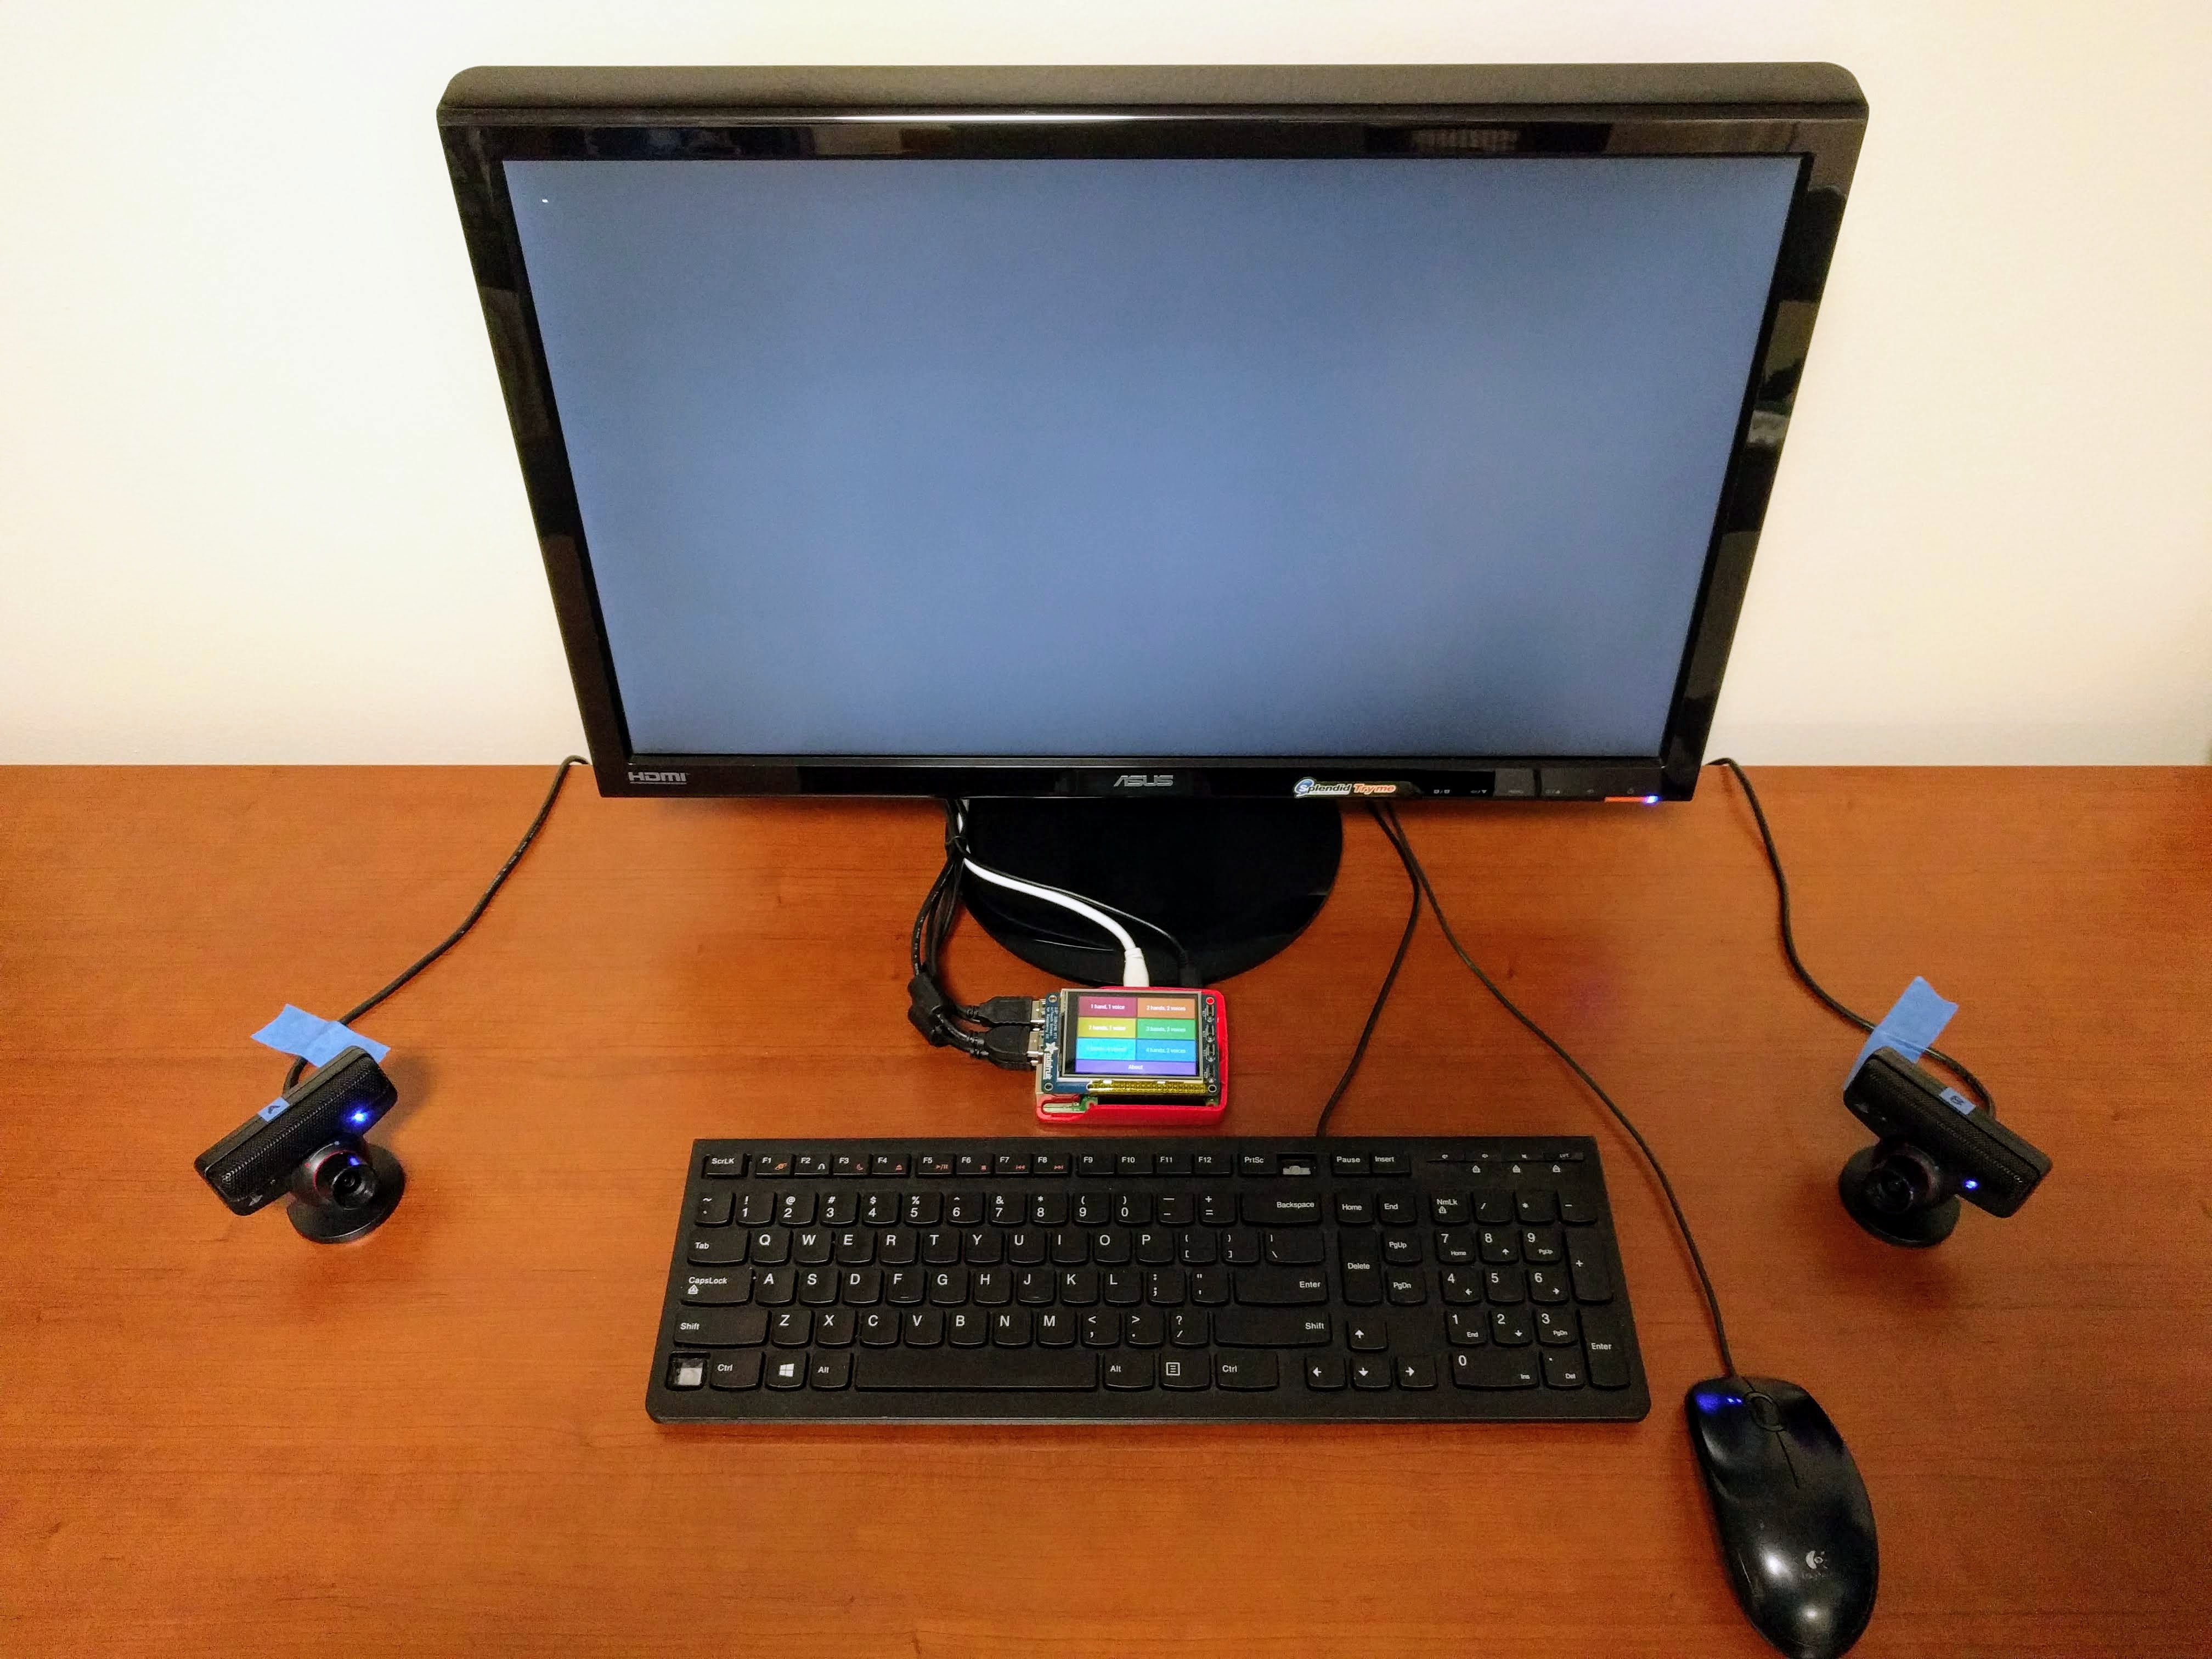 physical setup for testing the system